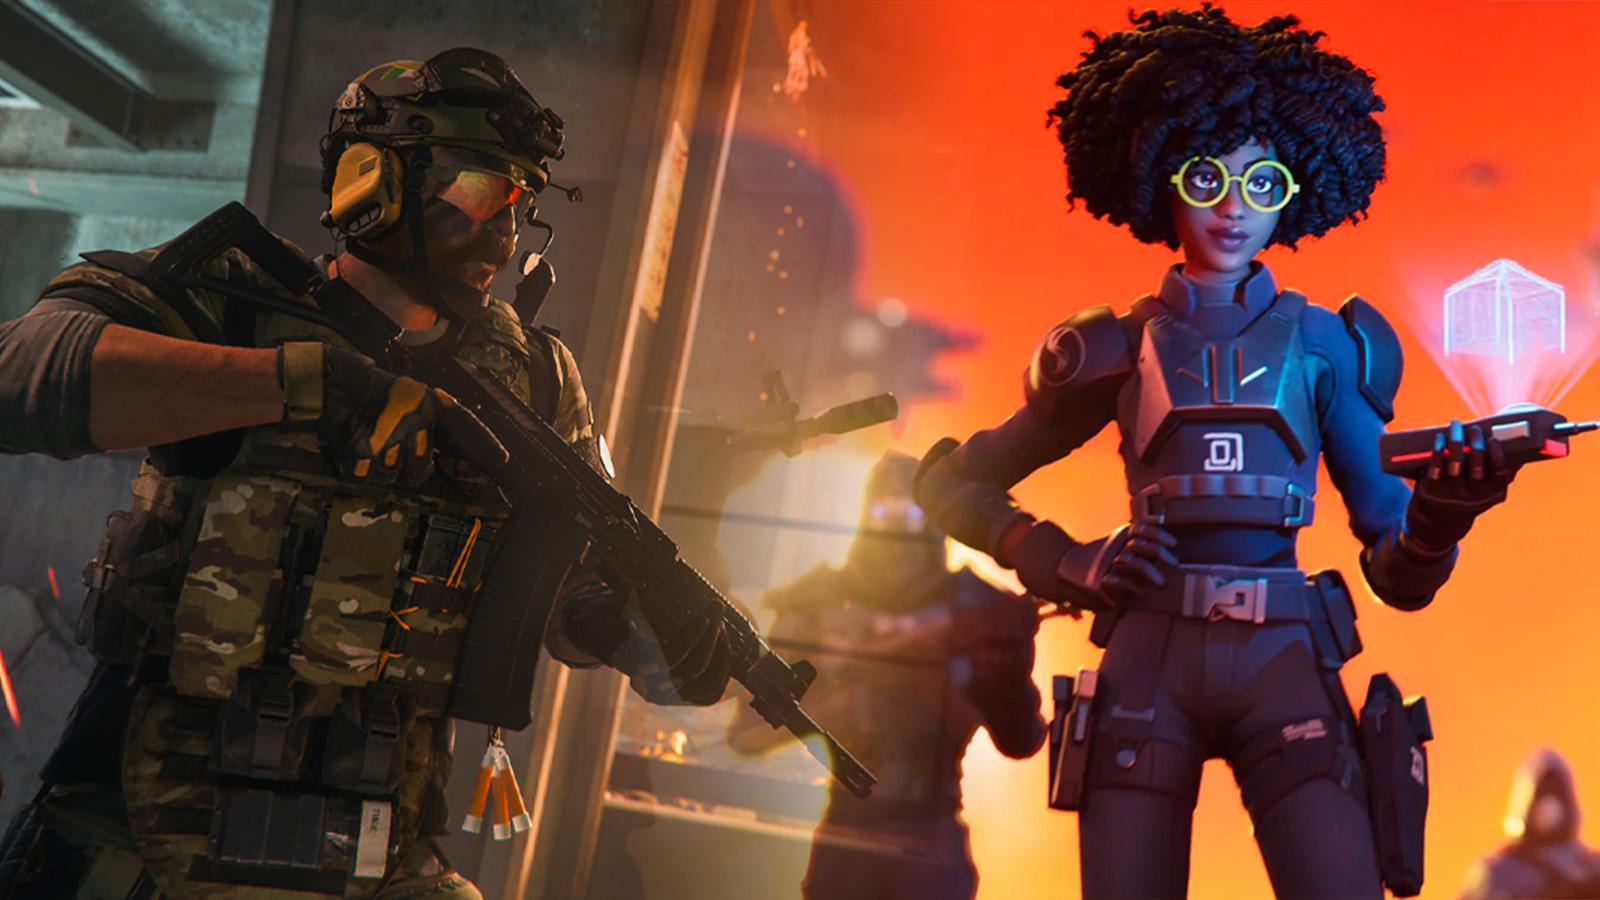 MW2 character next to Fortnite one